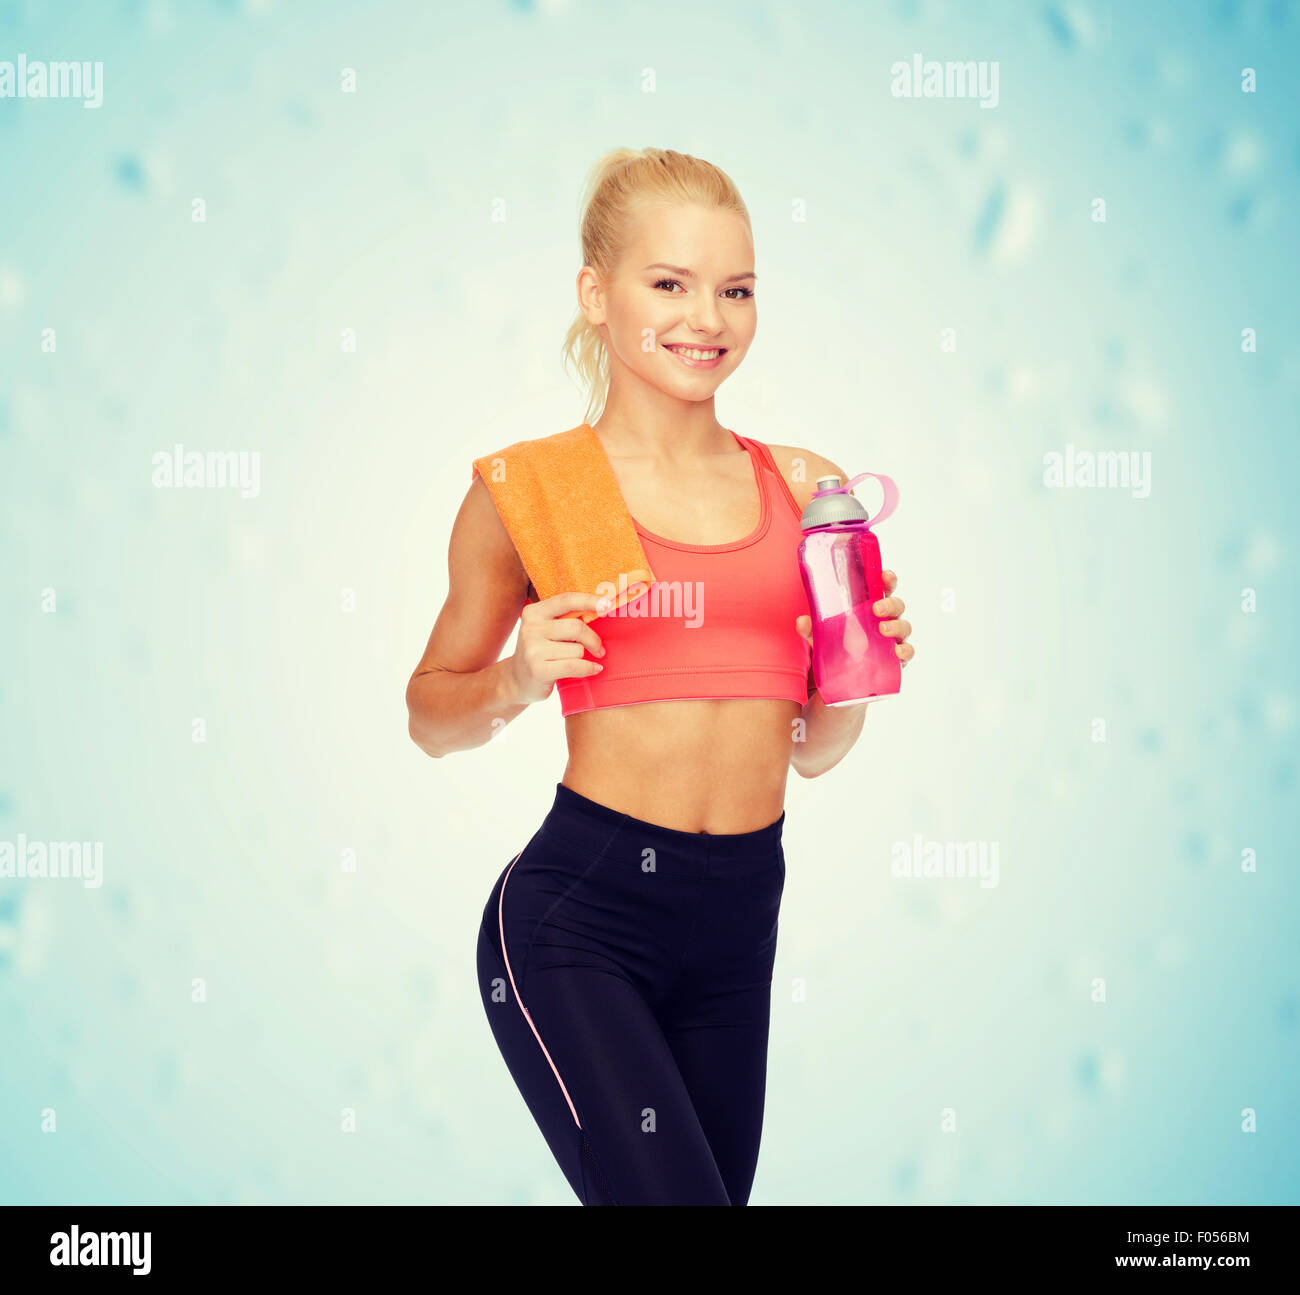 smiling sporty woman with water bottle and towel Stock Photo